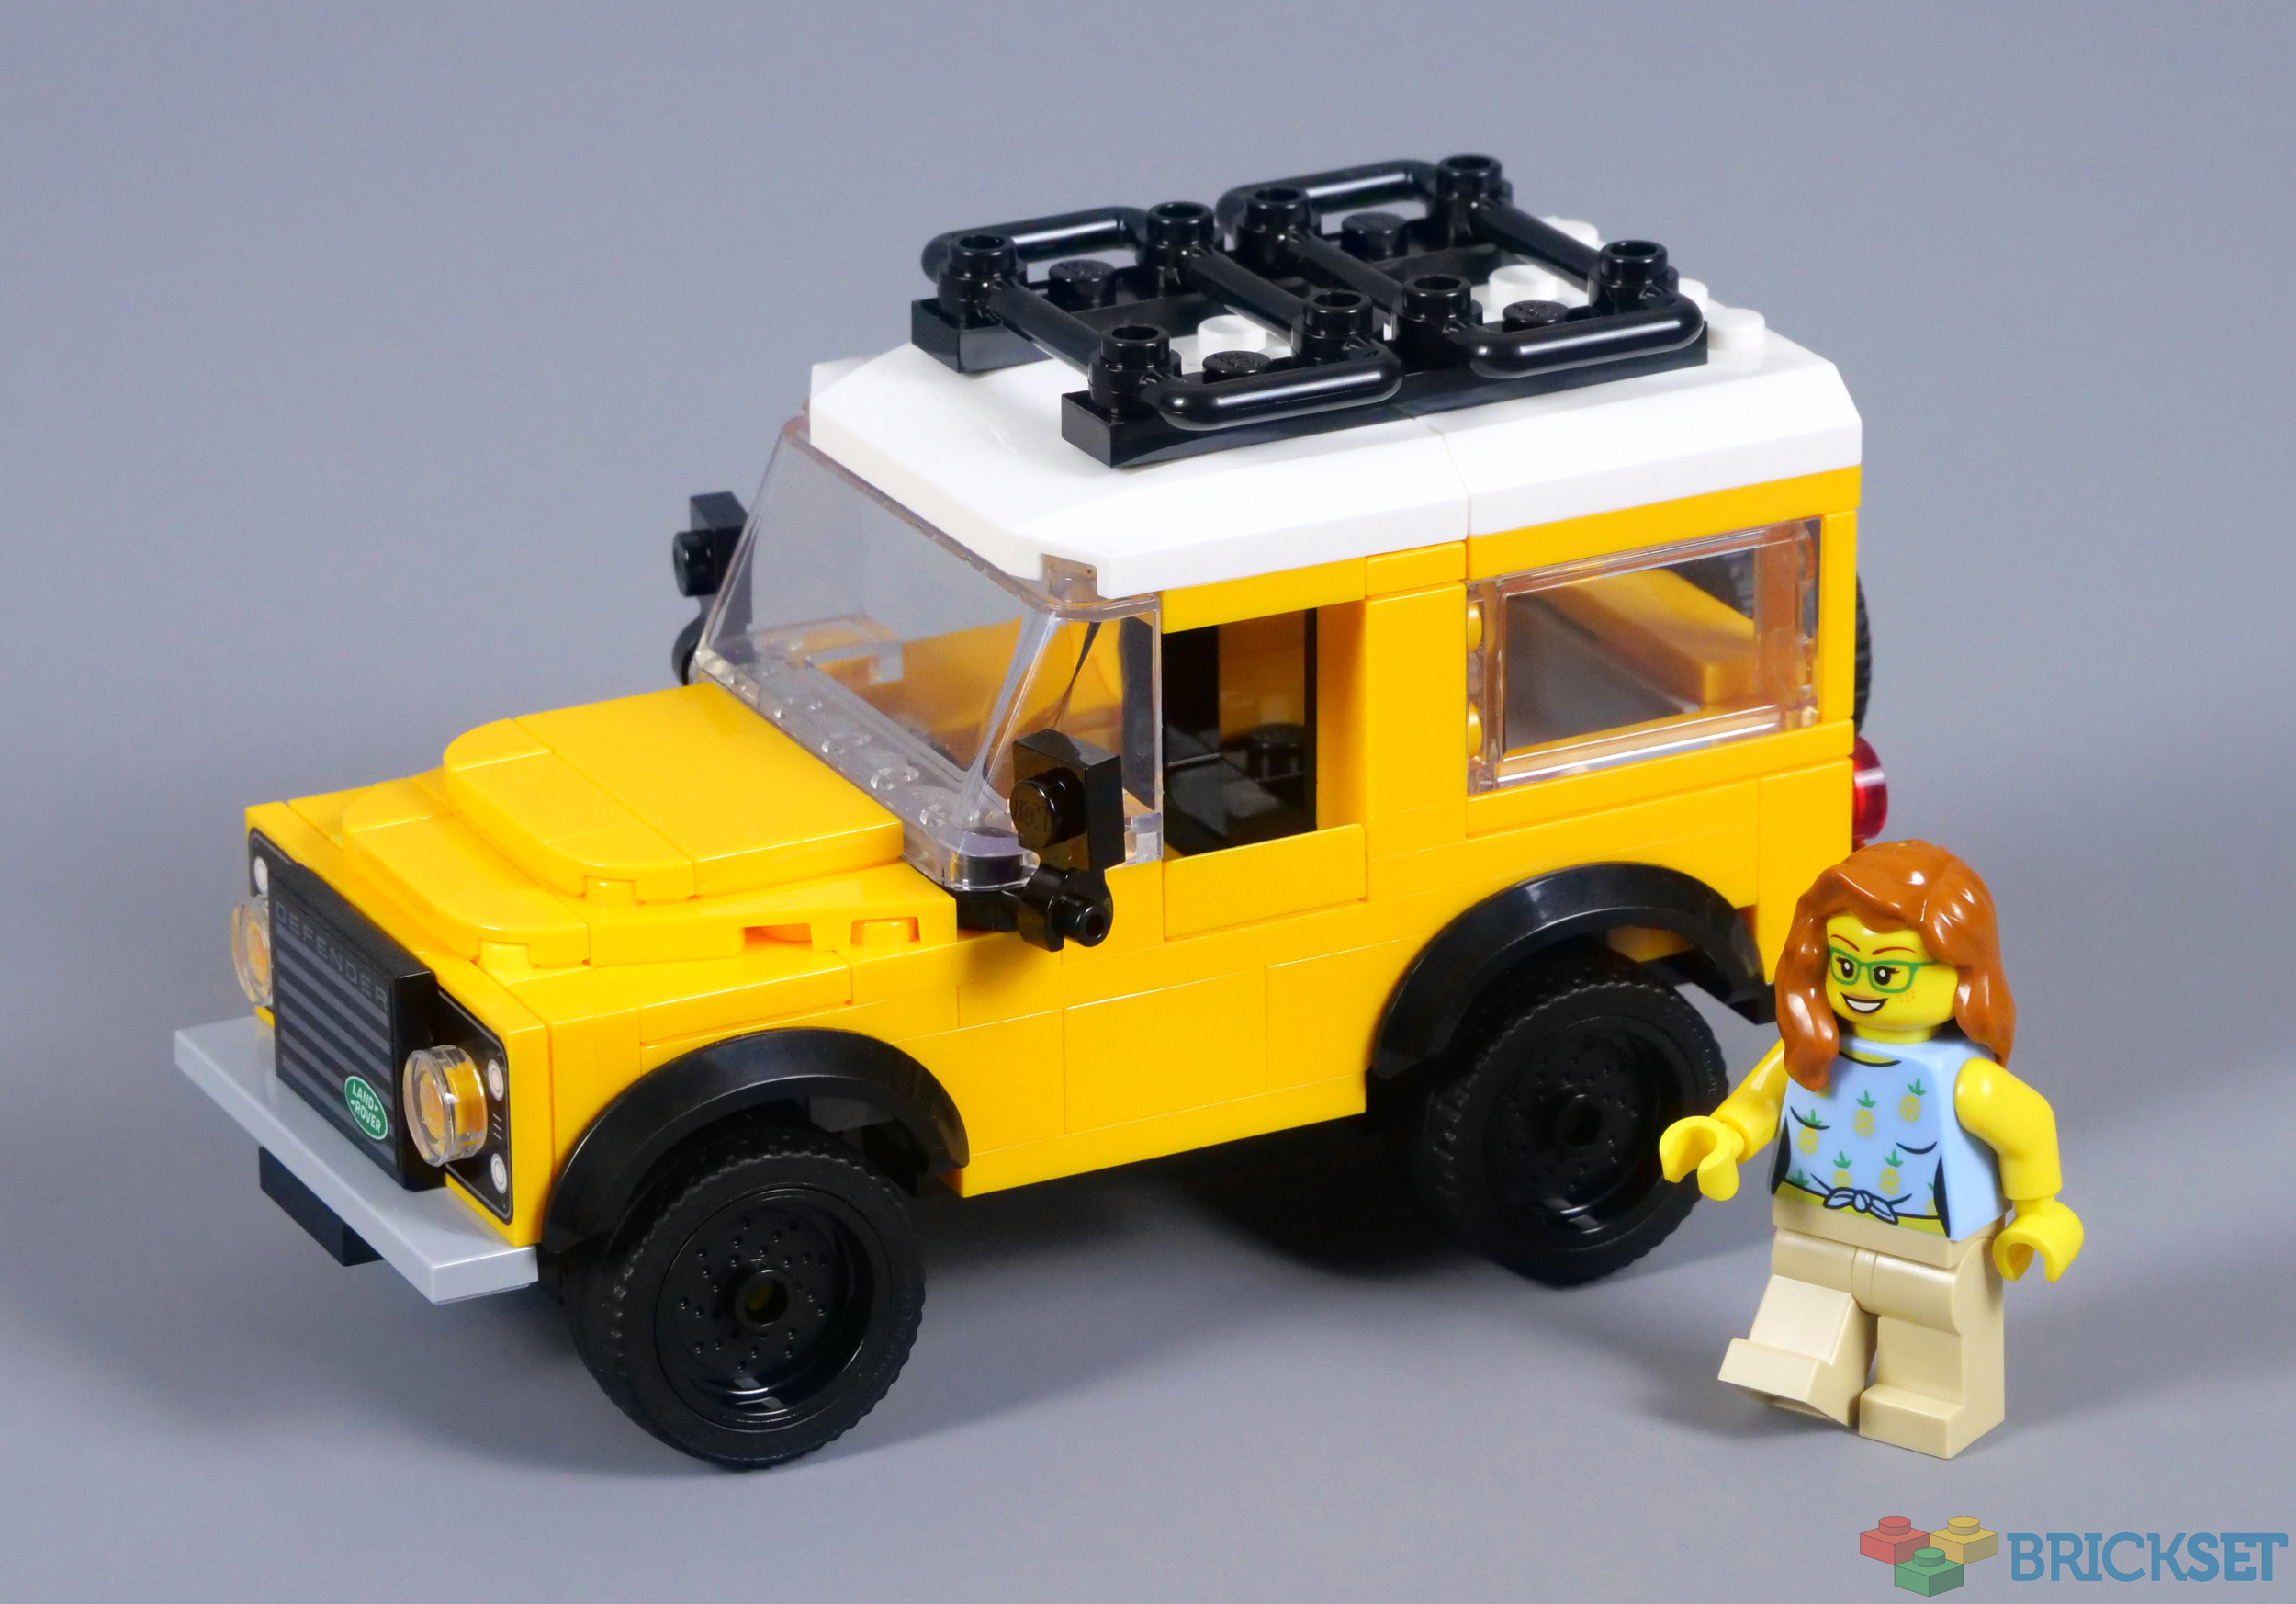 2020 Land Rover Defender gets the Lego treatment - CNET